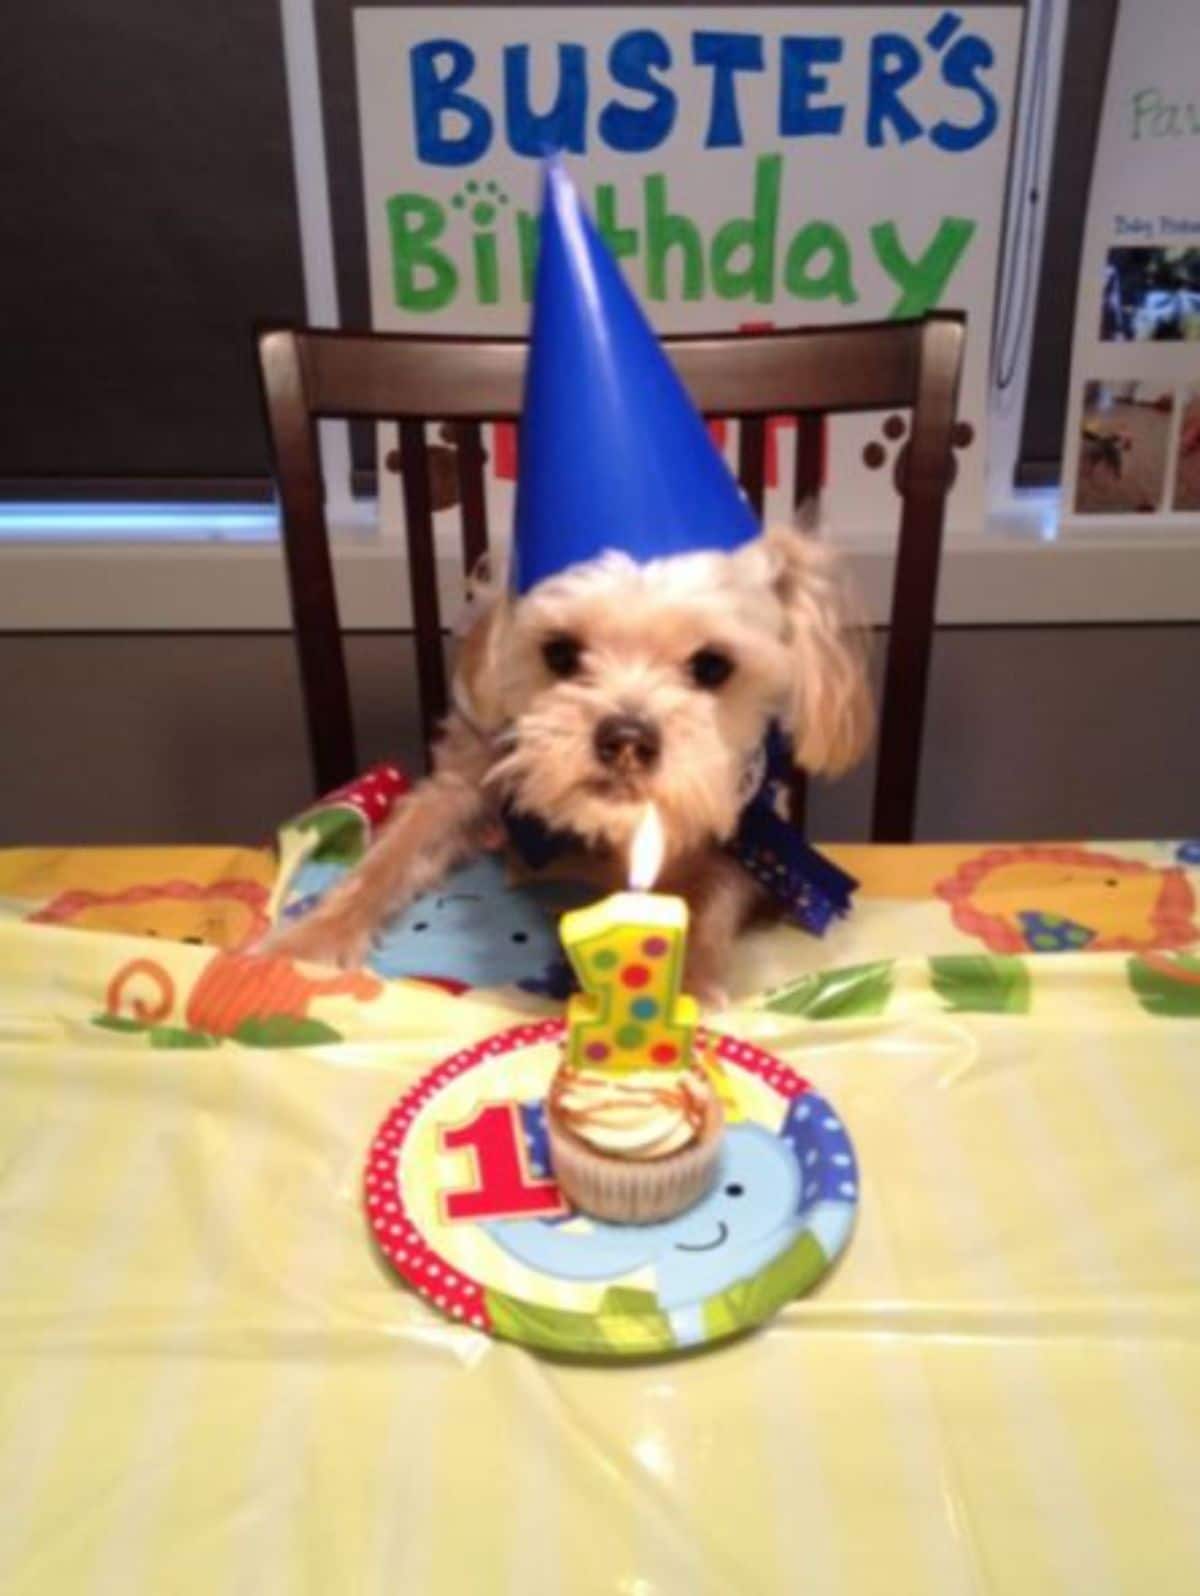 small fluffy brown dog in blue party hat sitting in front of a cupcake with a large 1 candle